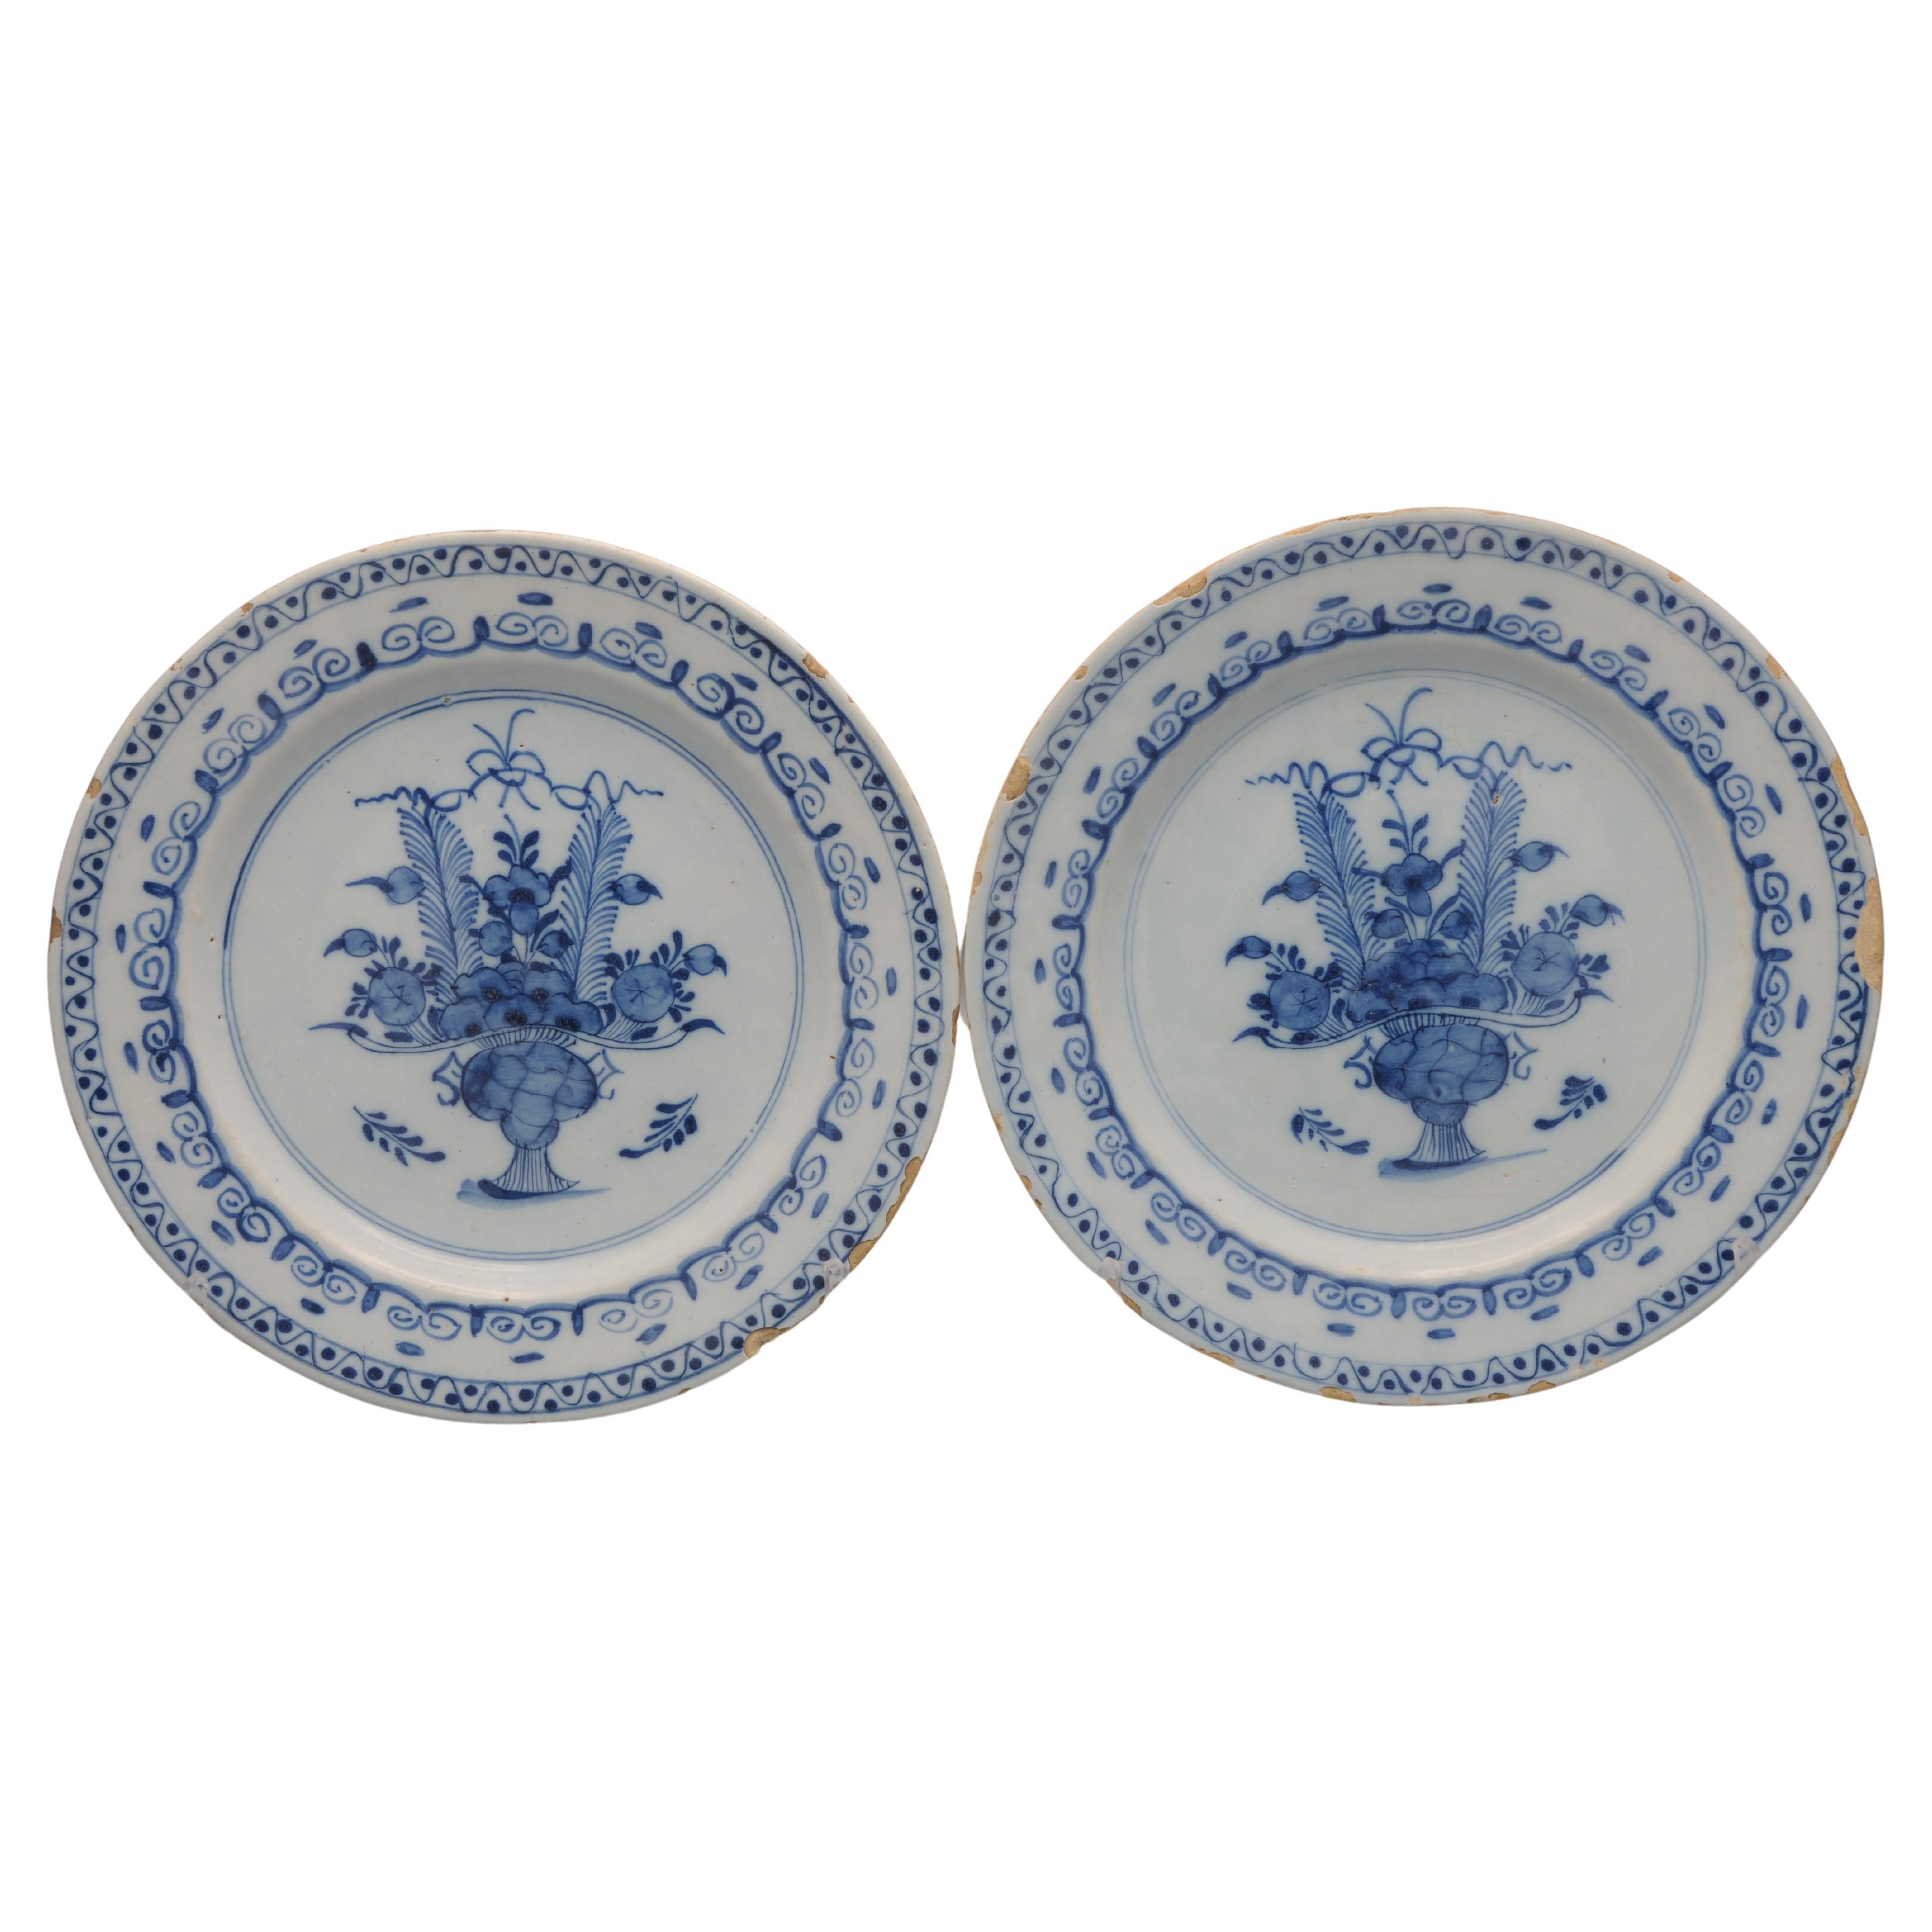 Delft - Pair of neoclassical chinoiserie plates - Late 18th century 